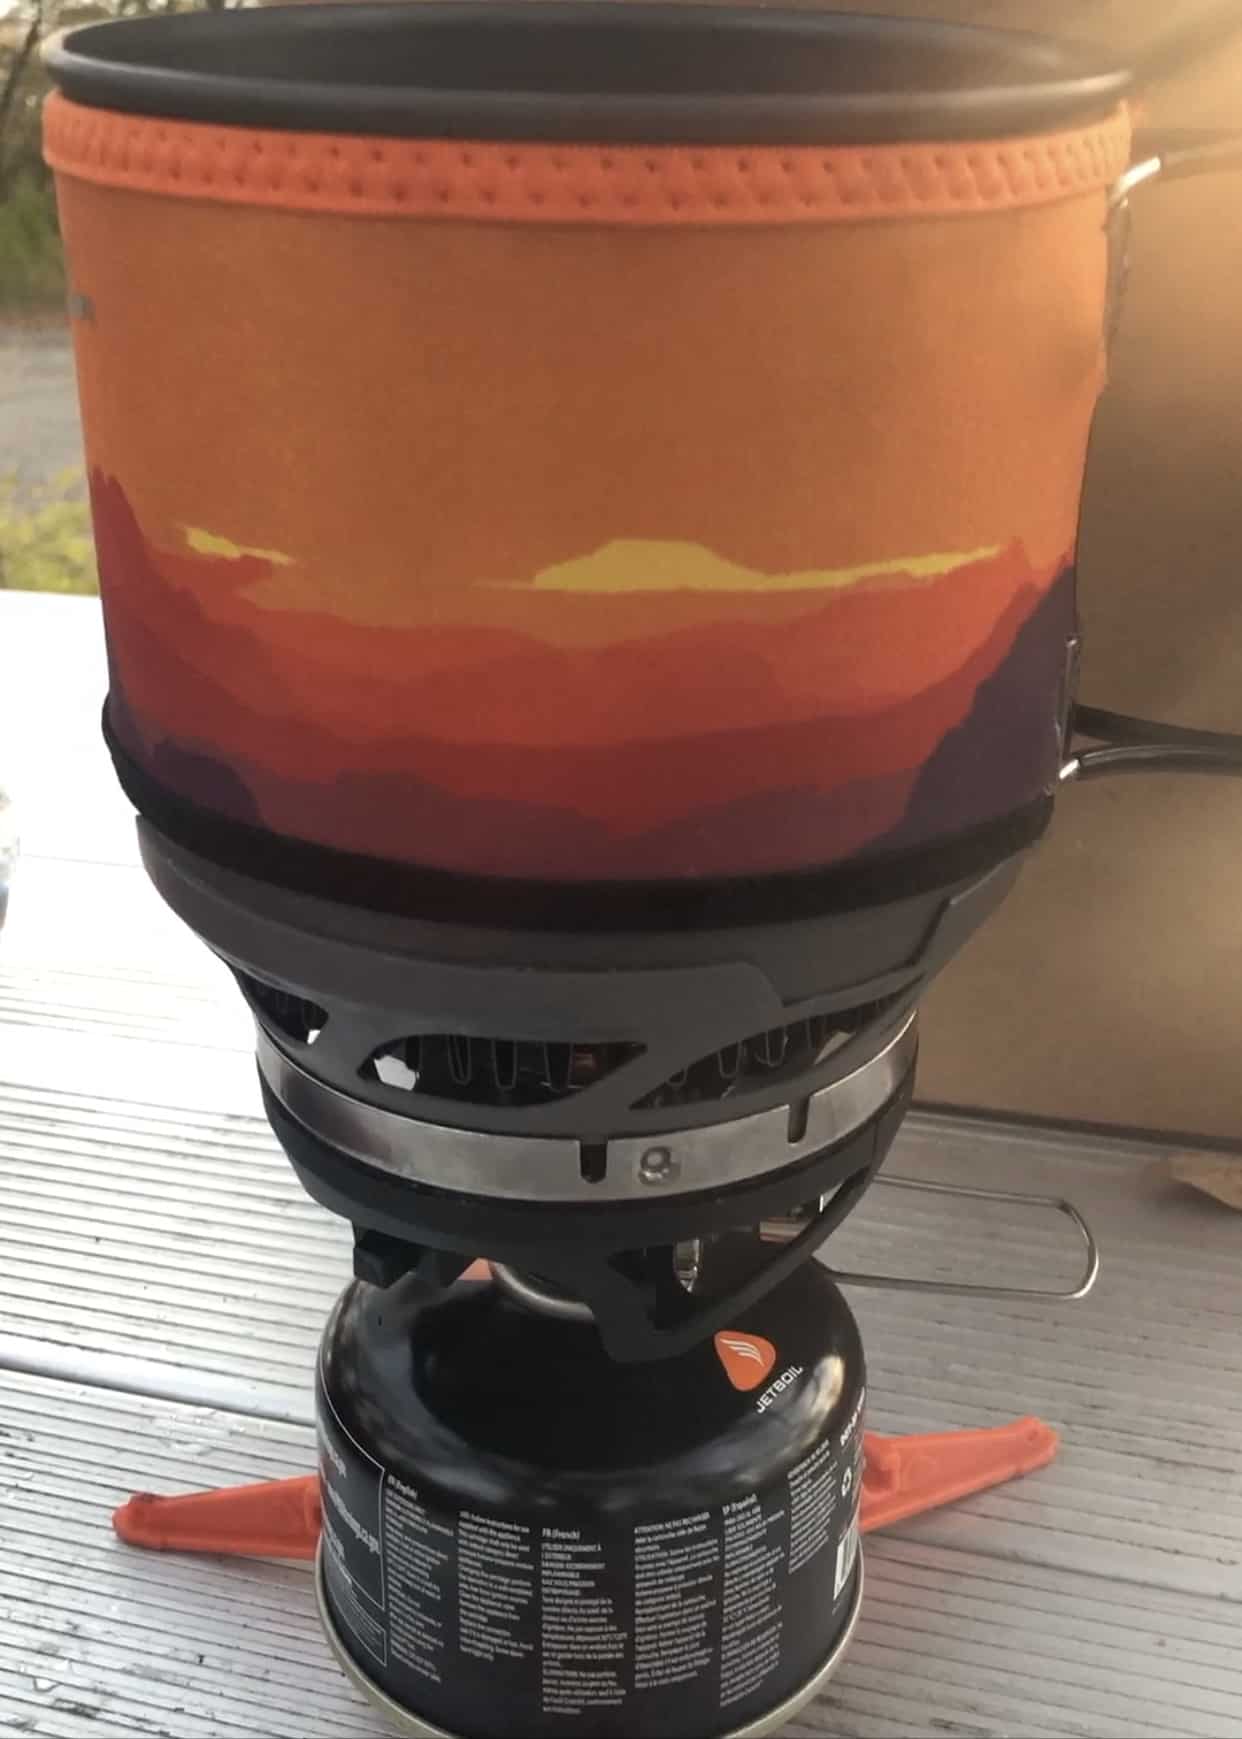 Photograph of my Jetboil for boiling water.